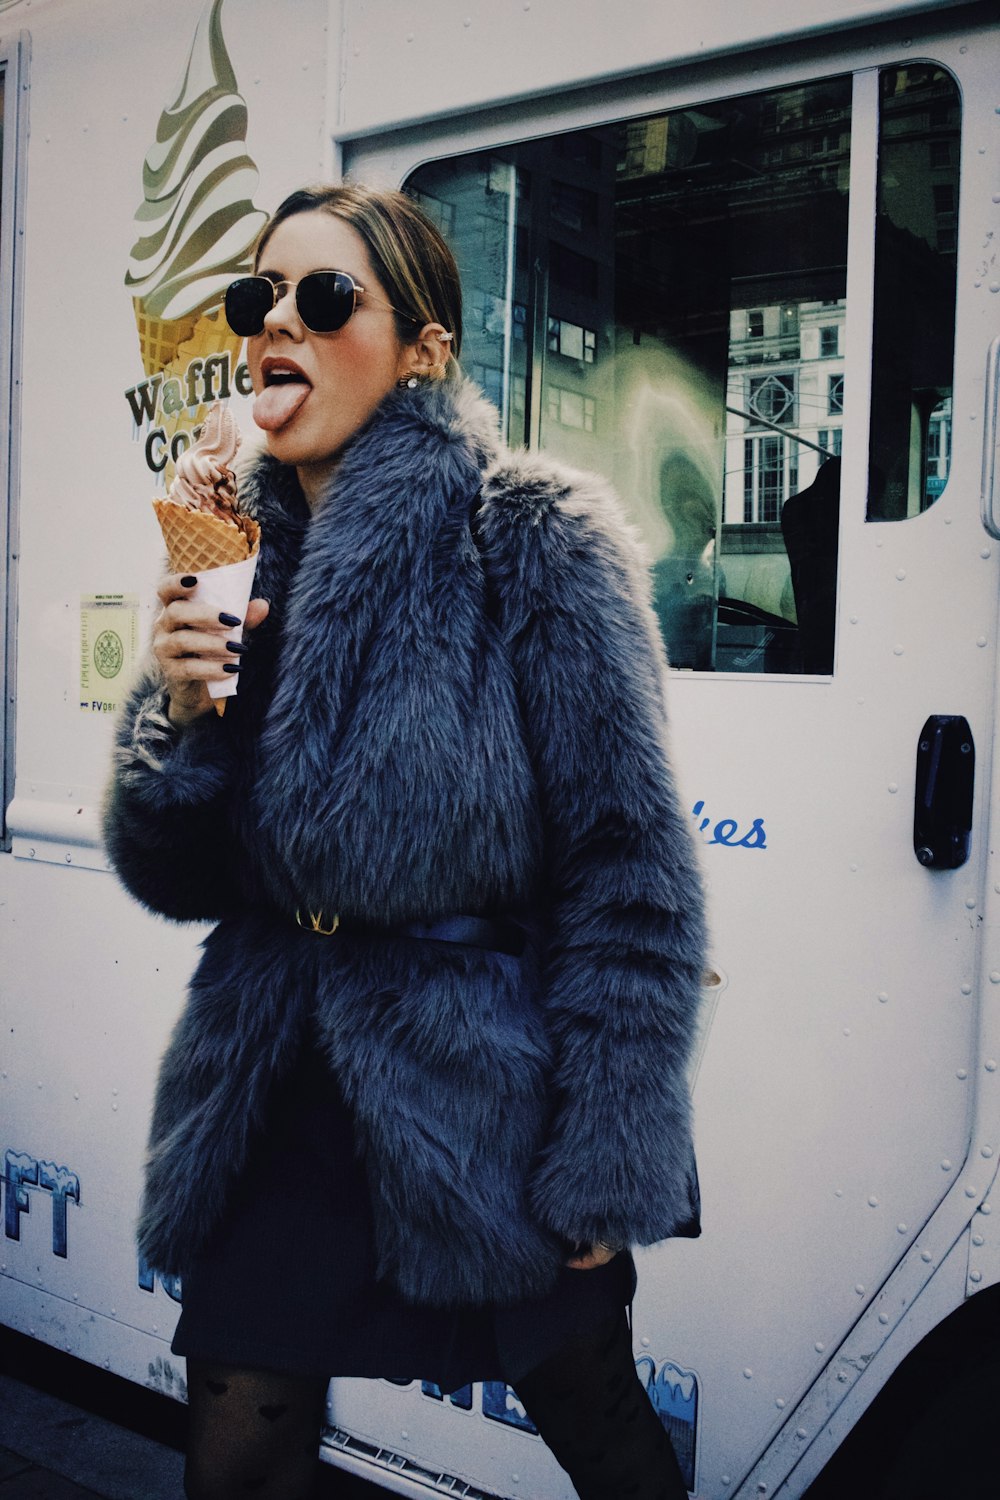 a woman in a fur coat eating an ice cream cone